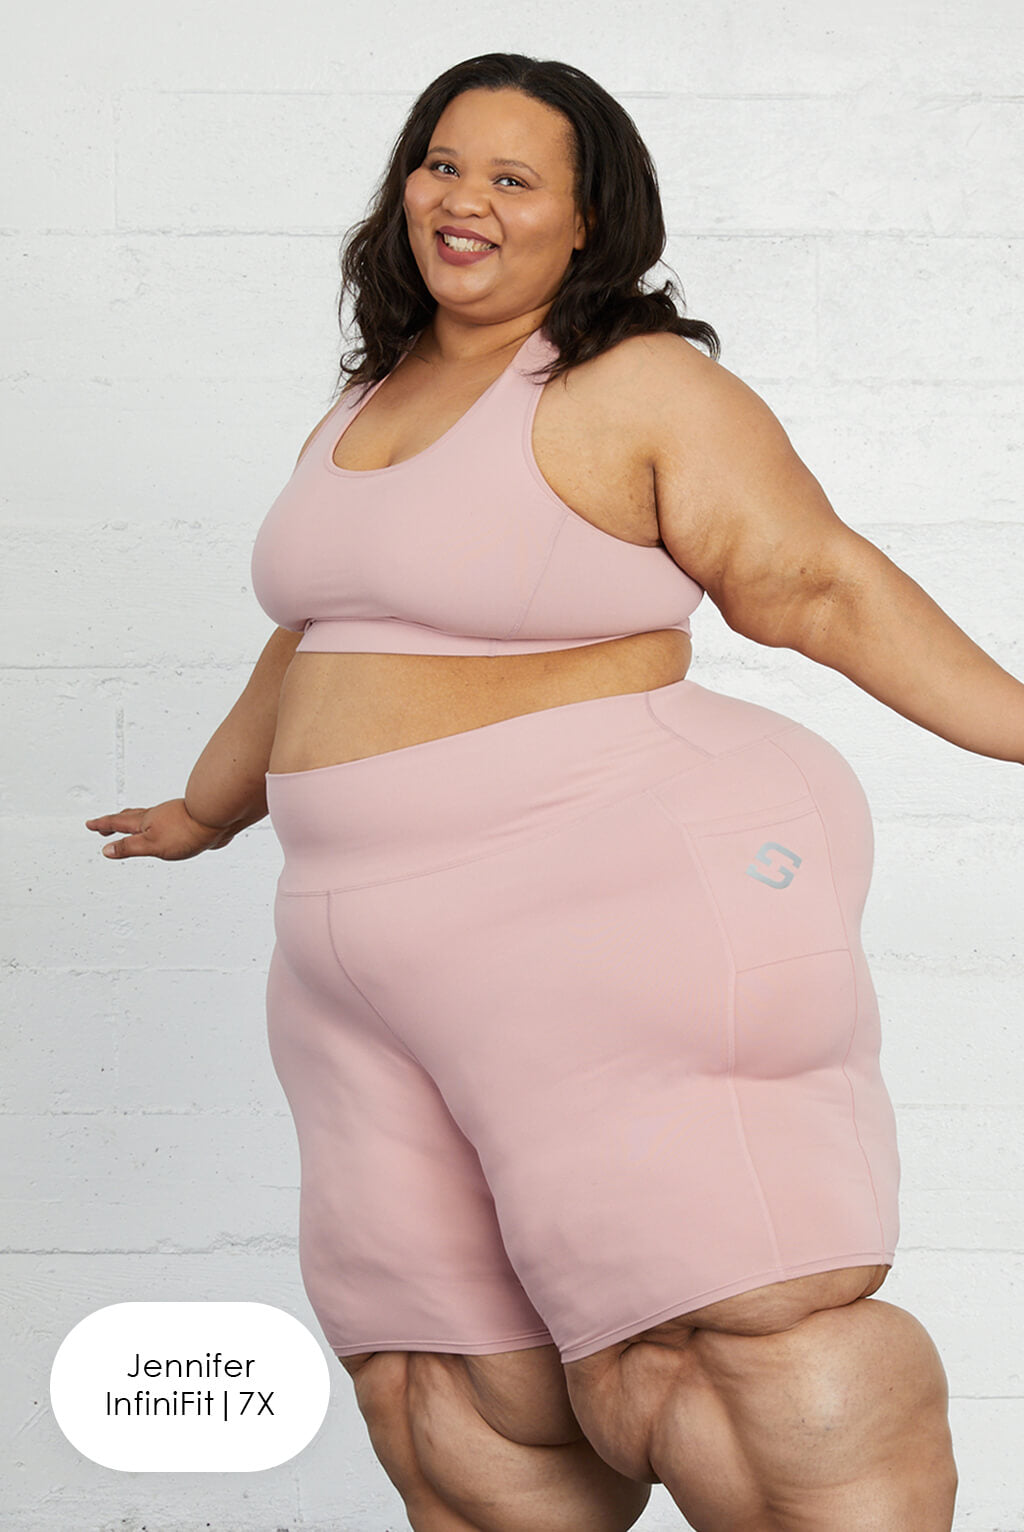 Size 5XL is here! – Superfit Hero